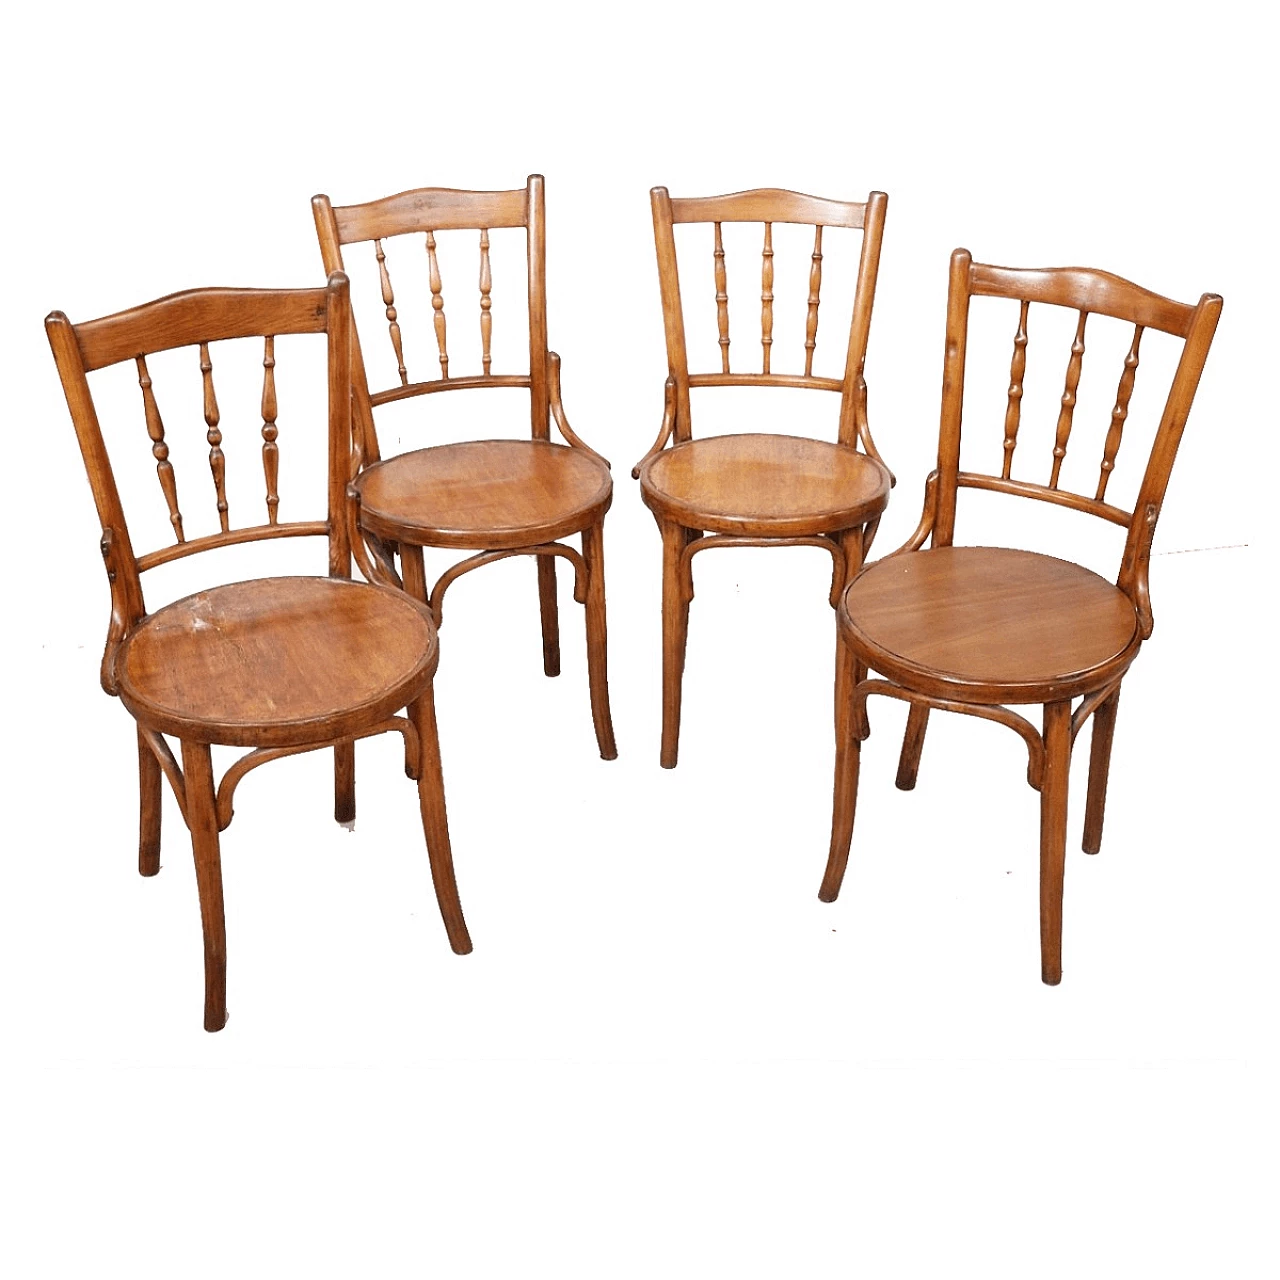 Four antique chairs in curved beech wood from the end of the 19th century 1061224